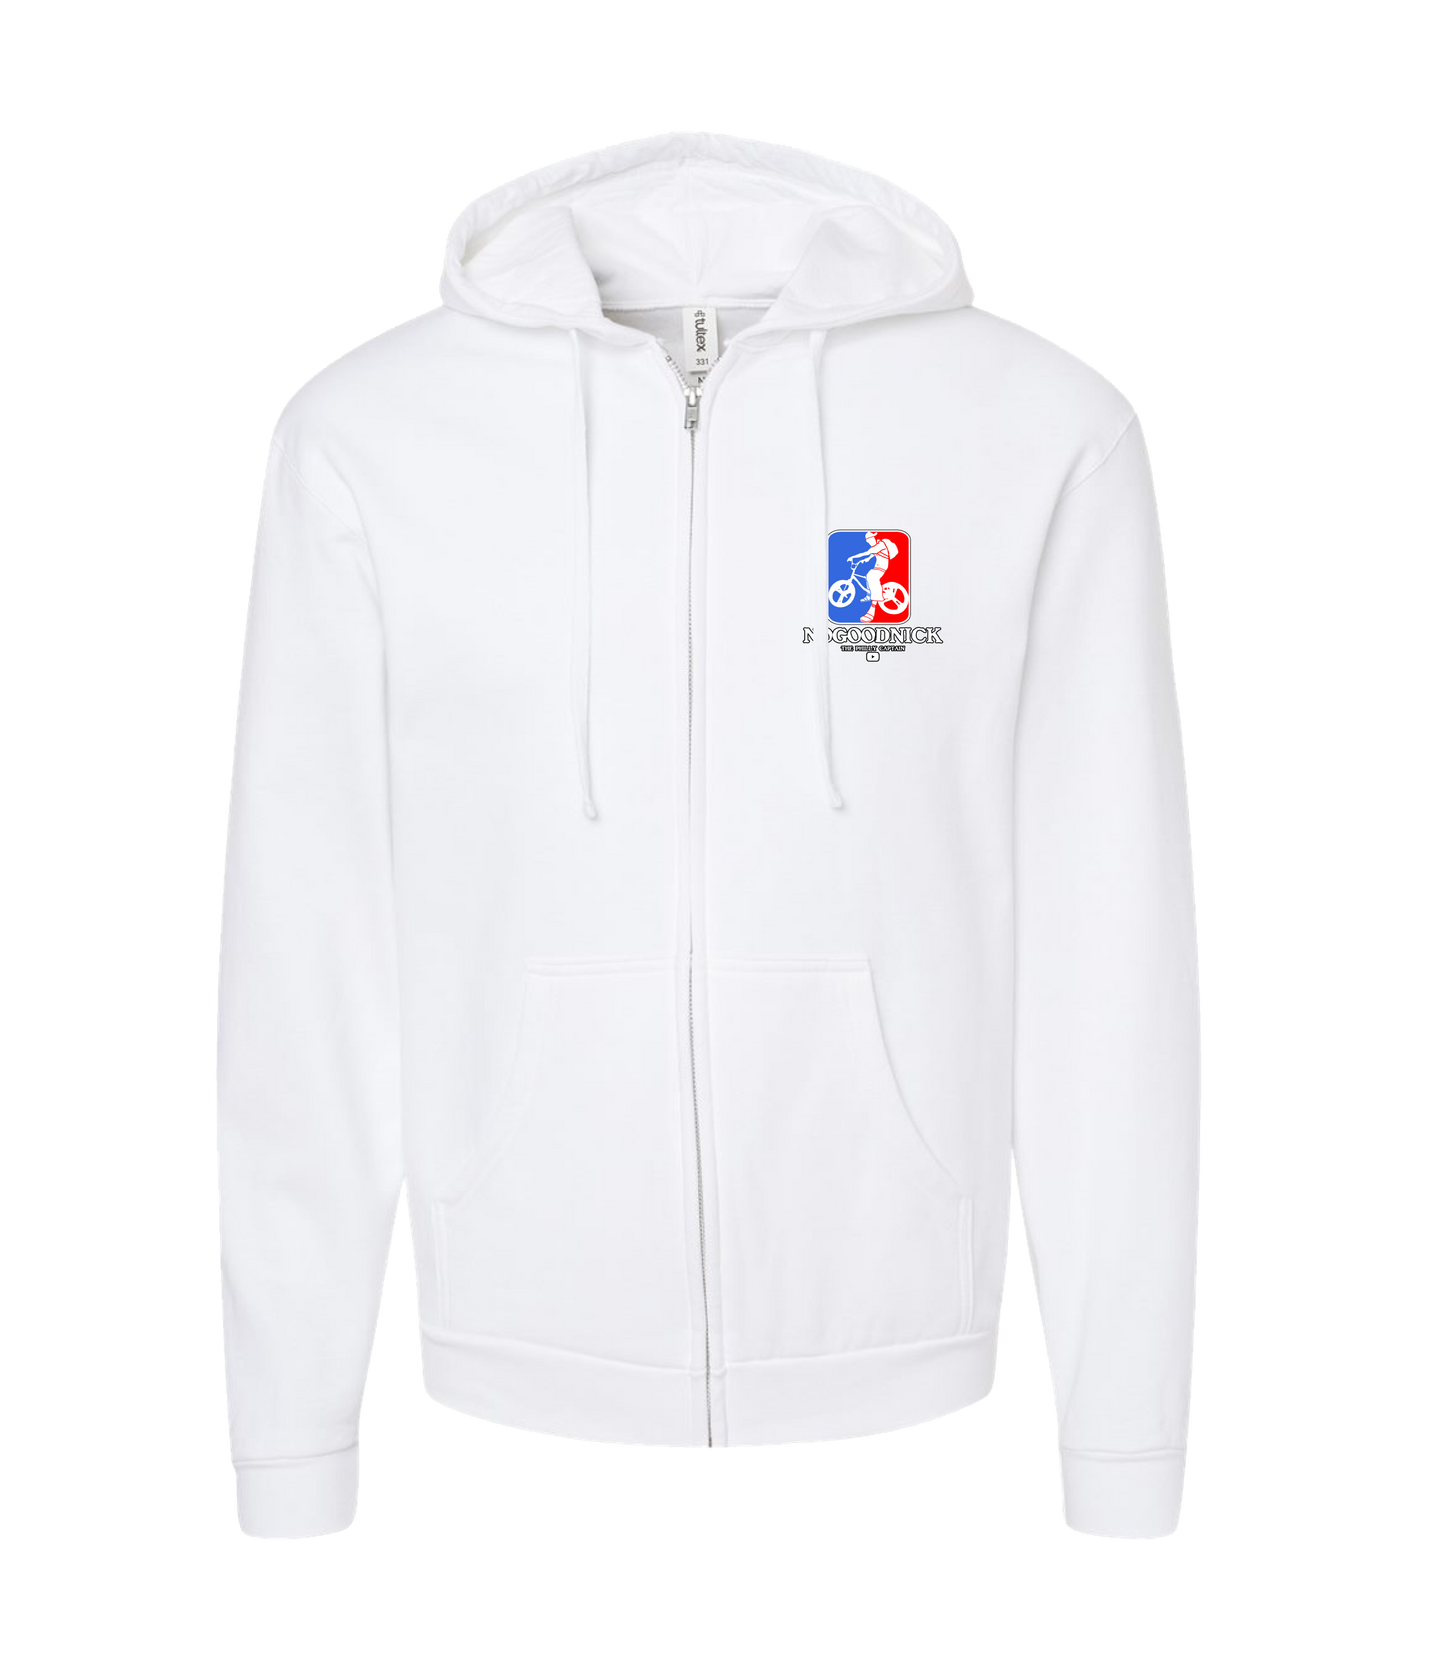 The Philly Captain's Merch is Fire - No Good Nick - White Zip Up Hoodie